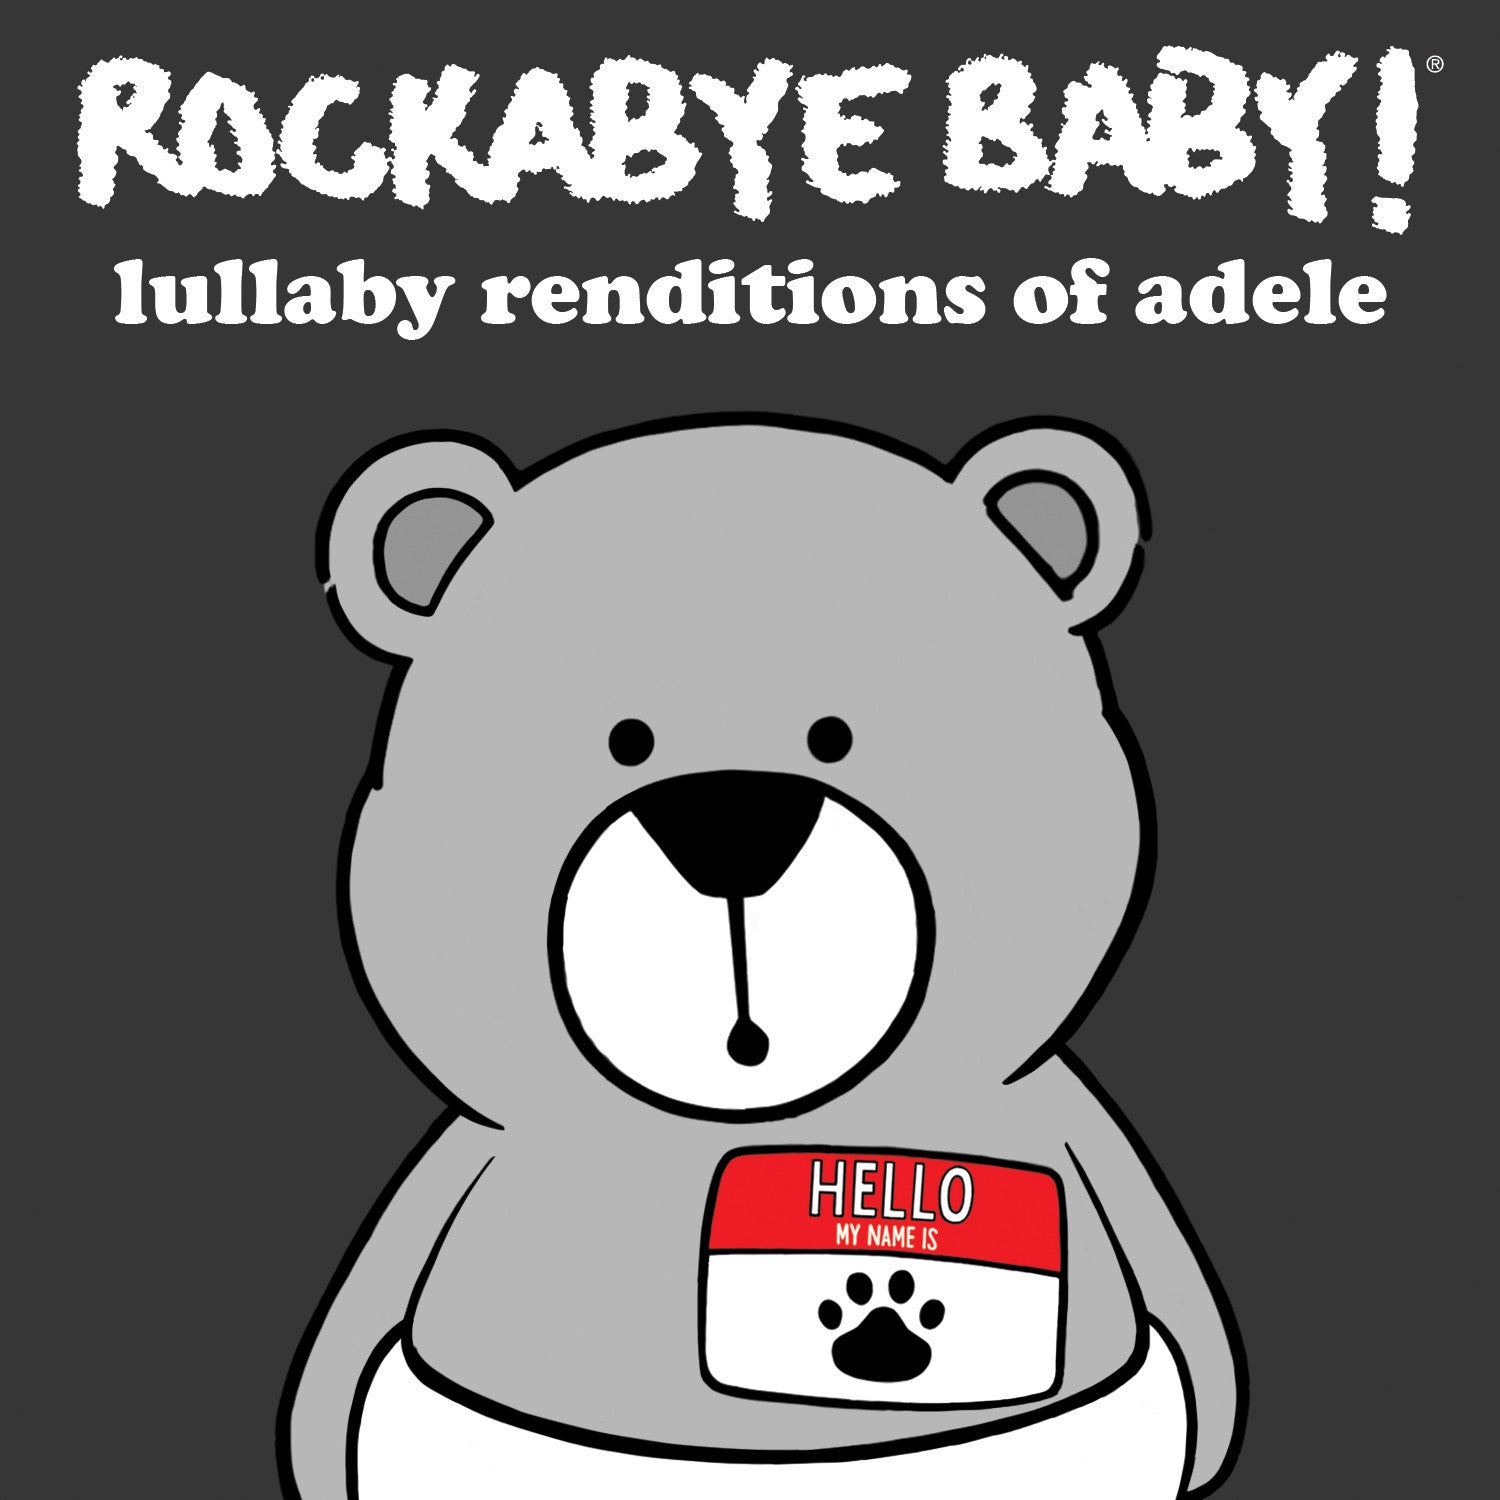 rockabye baby illustration for album of modern lullaby renditions adele